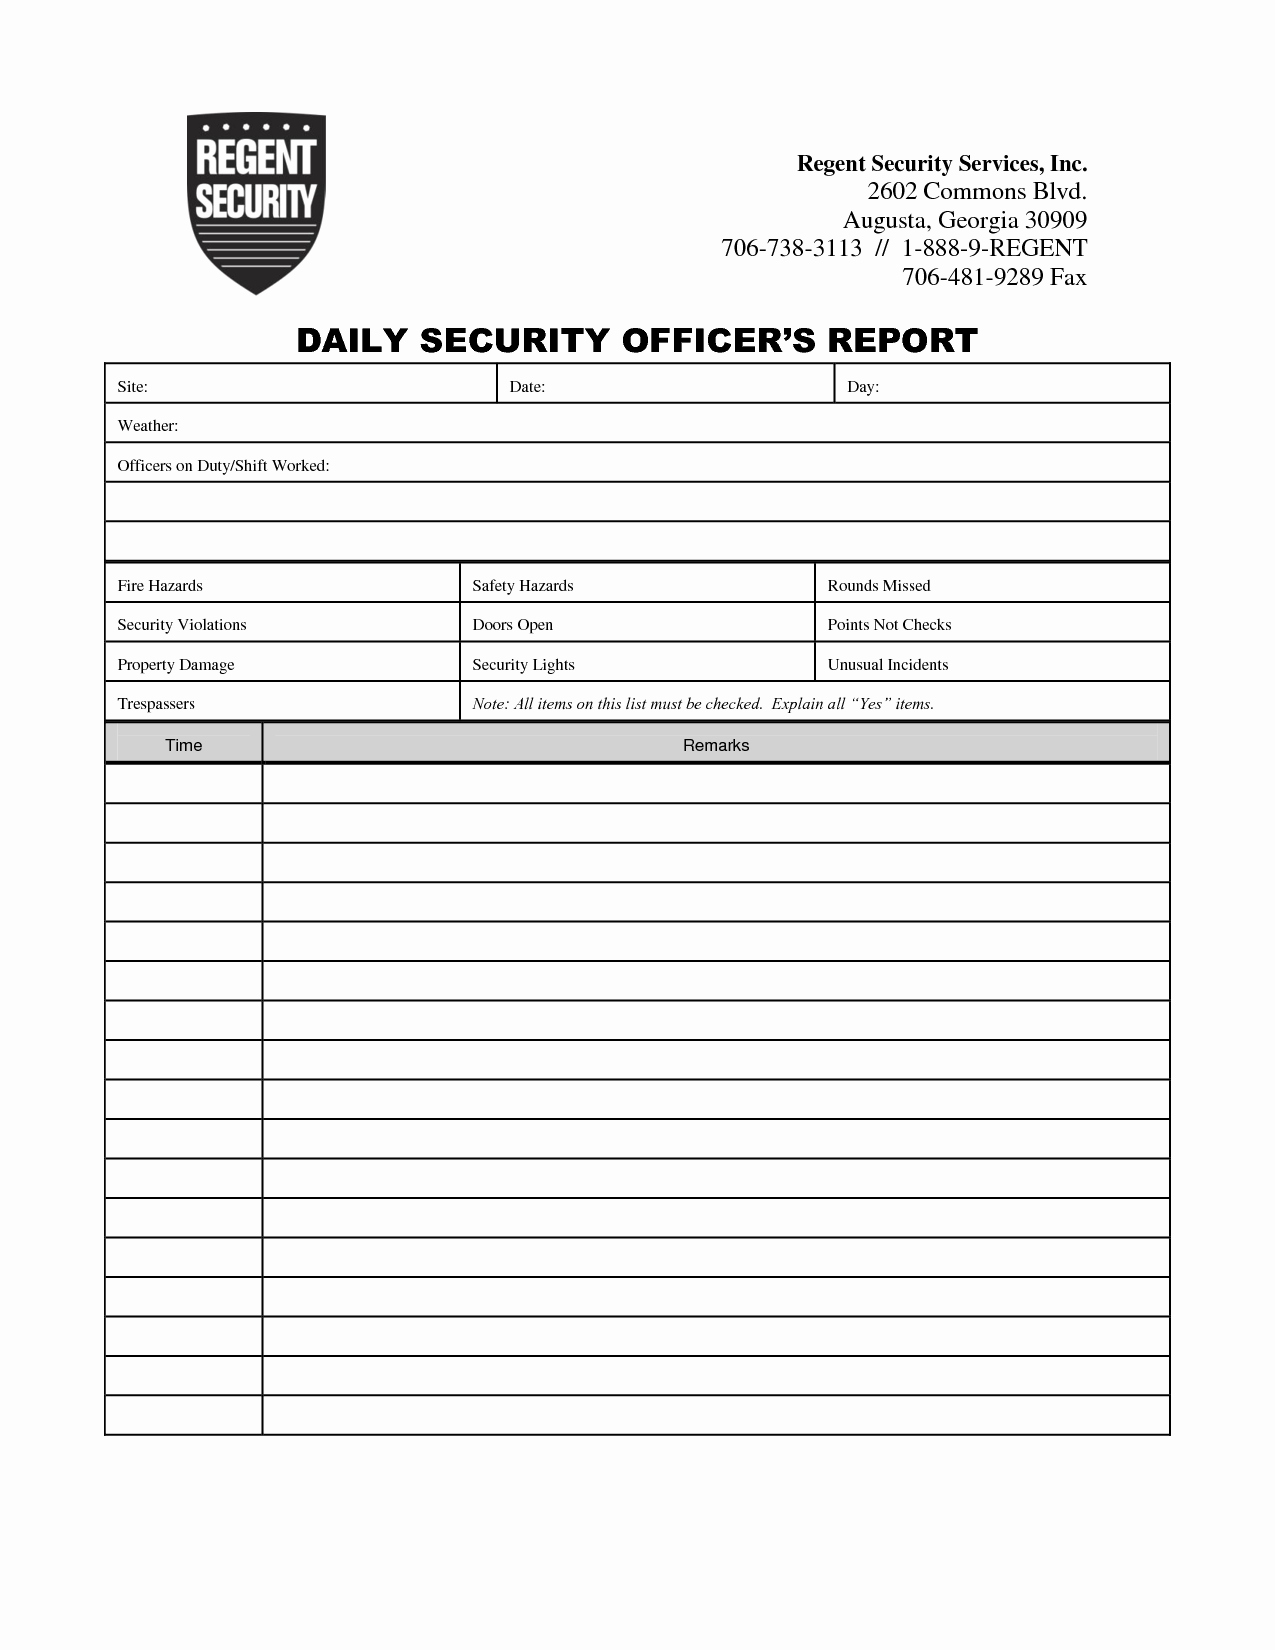 Weekly Activity Report Template Lovely Security Guard Daily Activity Report Sample